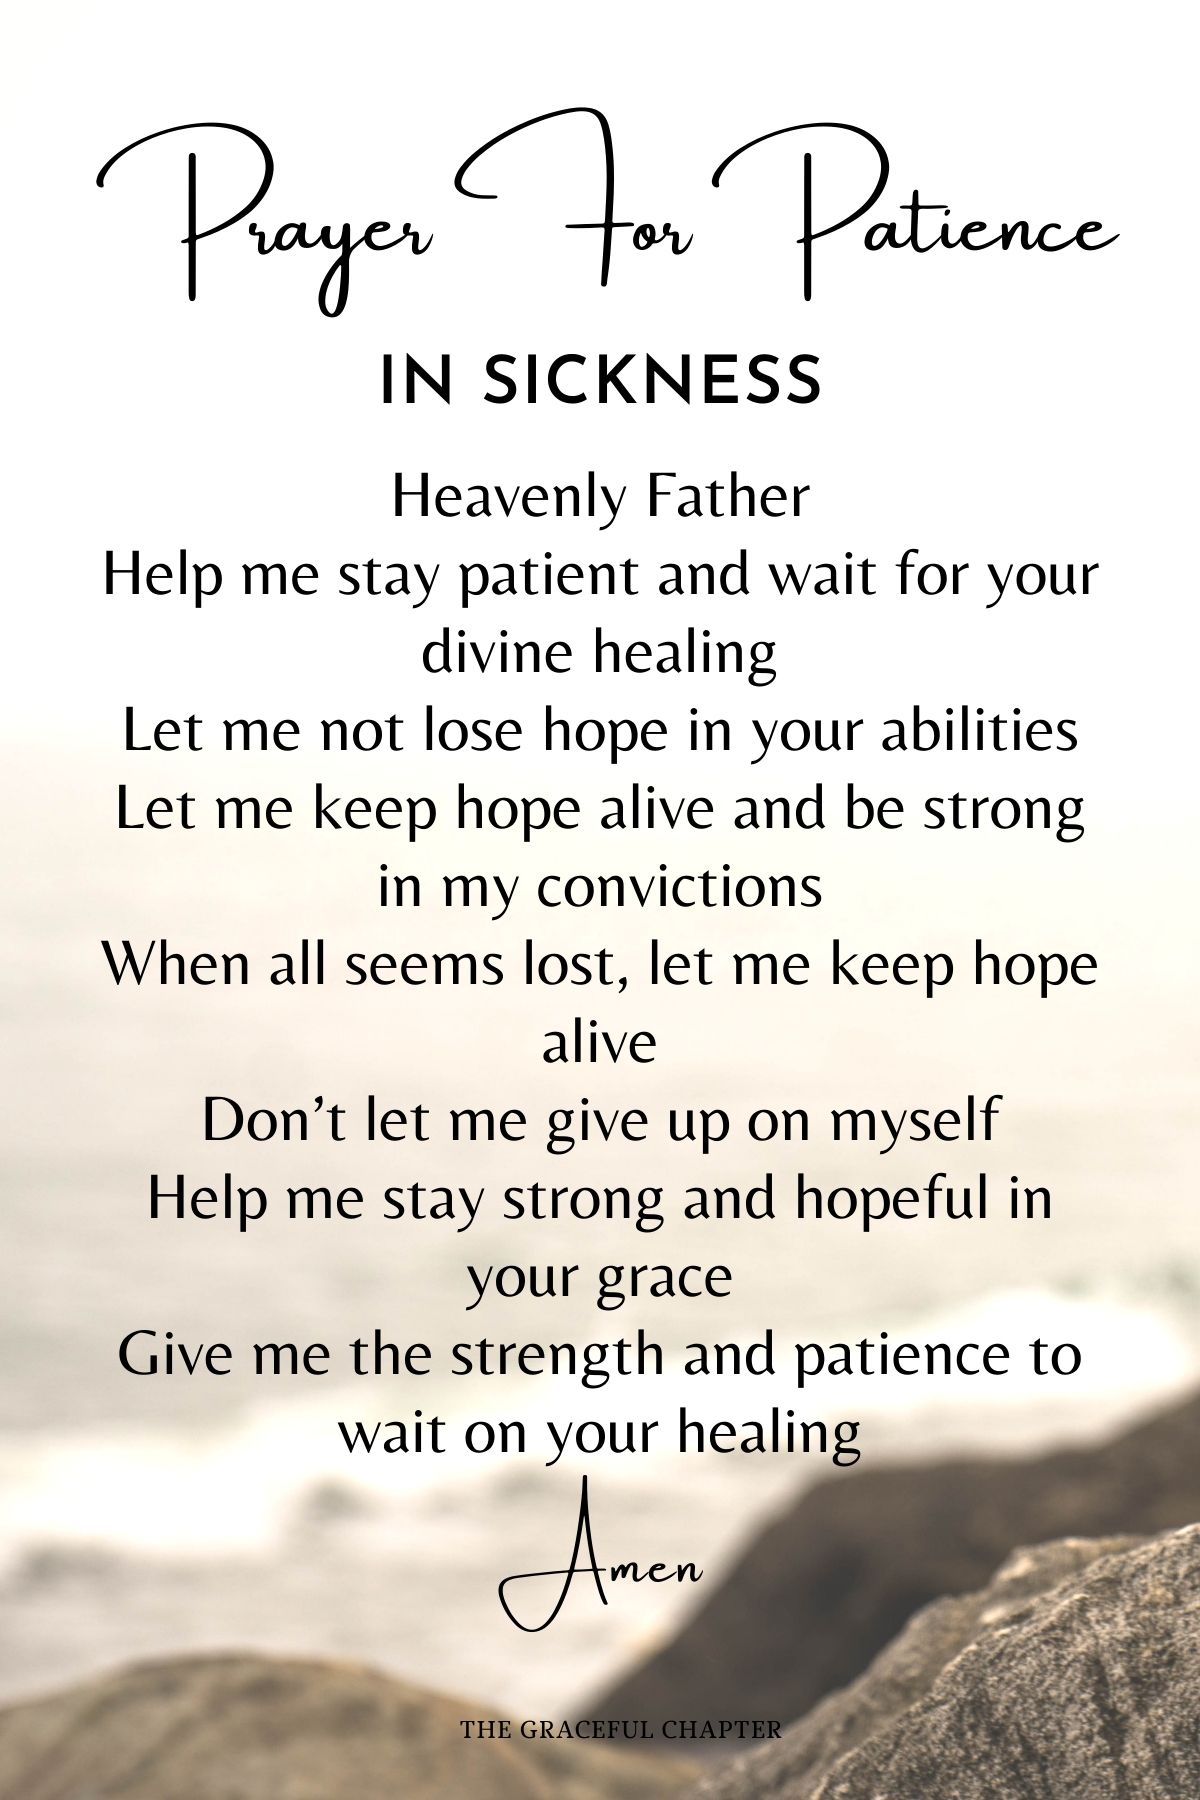 Prayer for patience in sickness